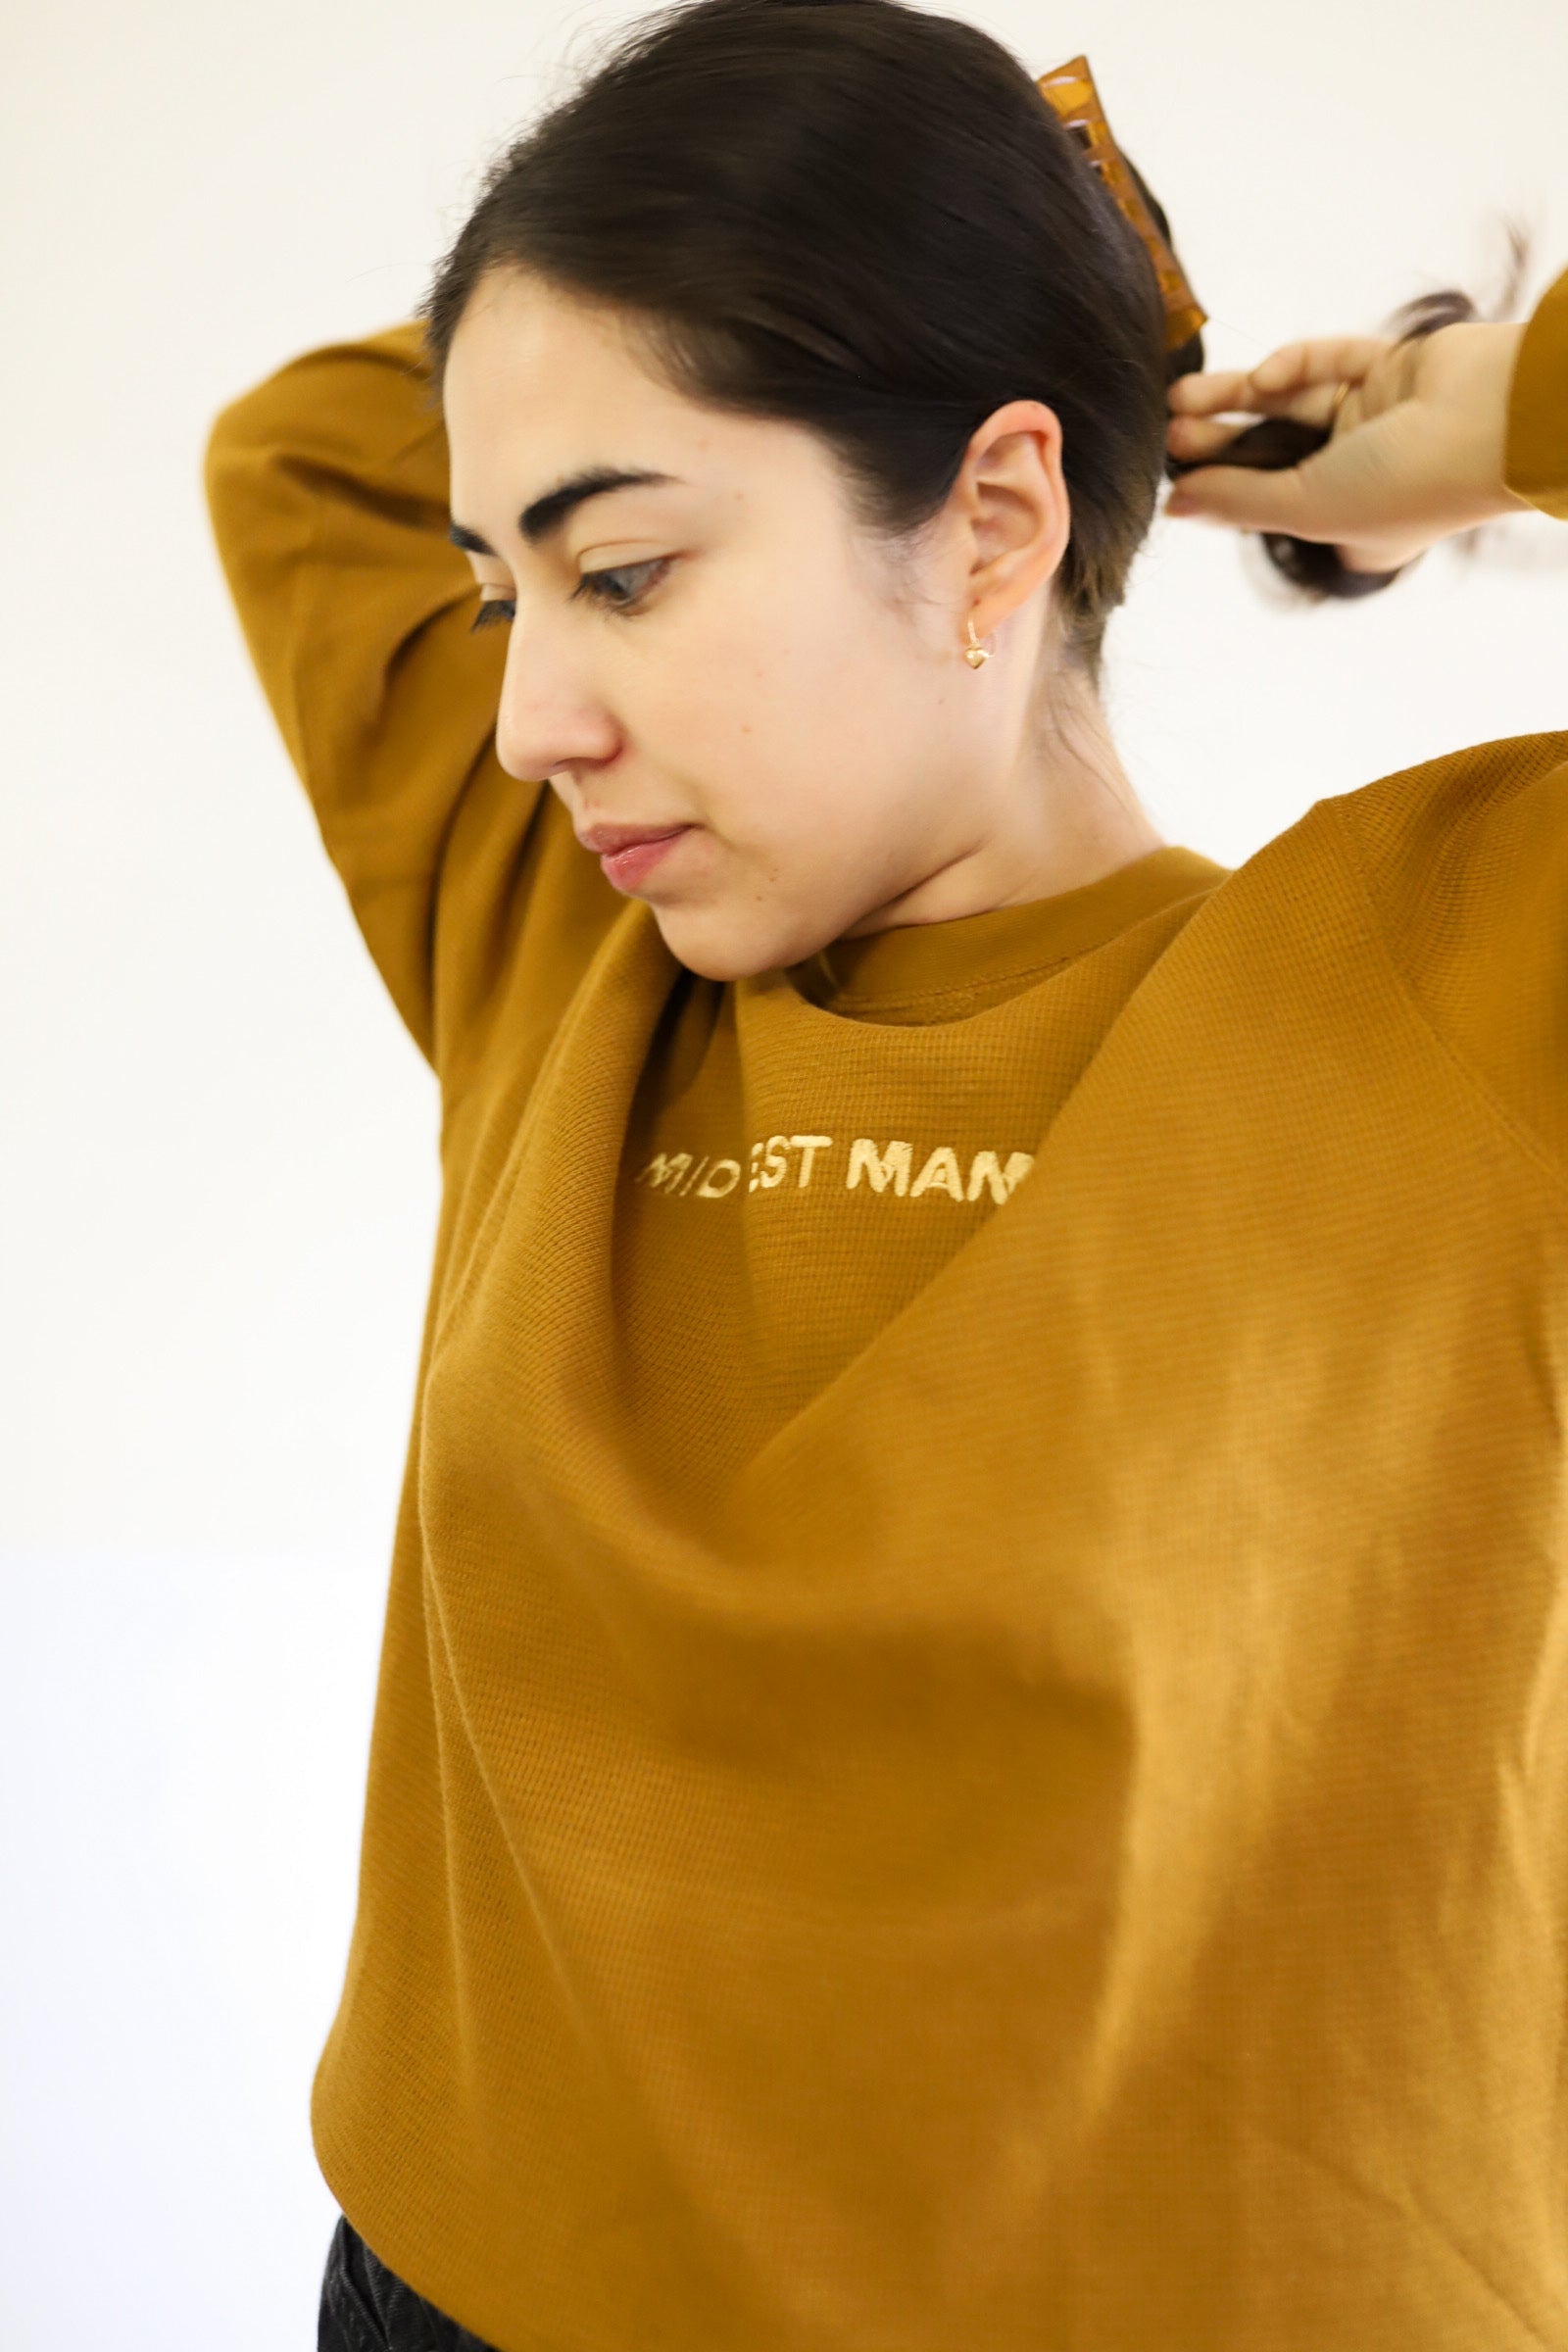 Midwest Mama | Embroidered Waffle Pullover